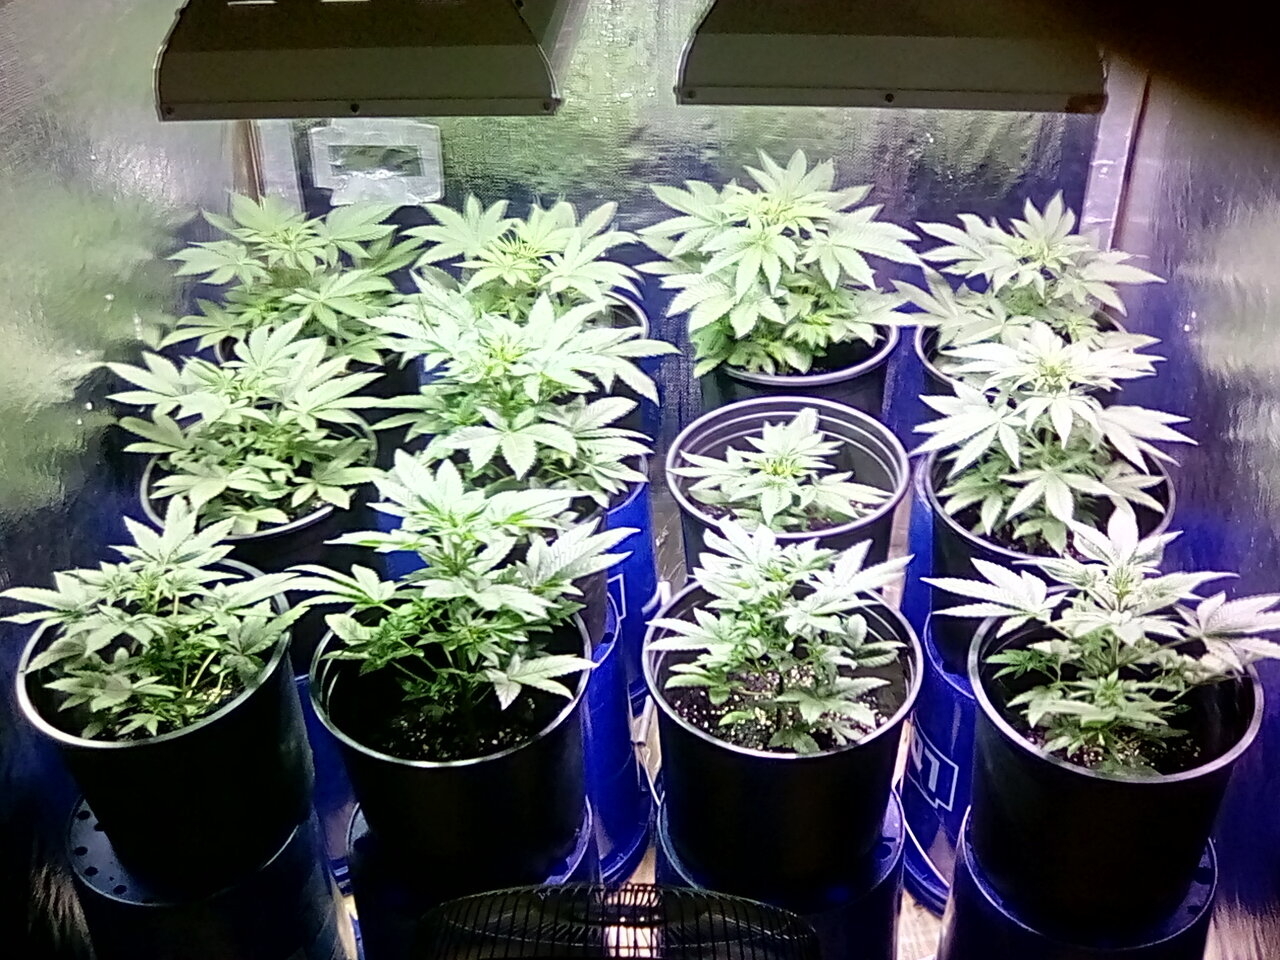 Day 6 of the flip